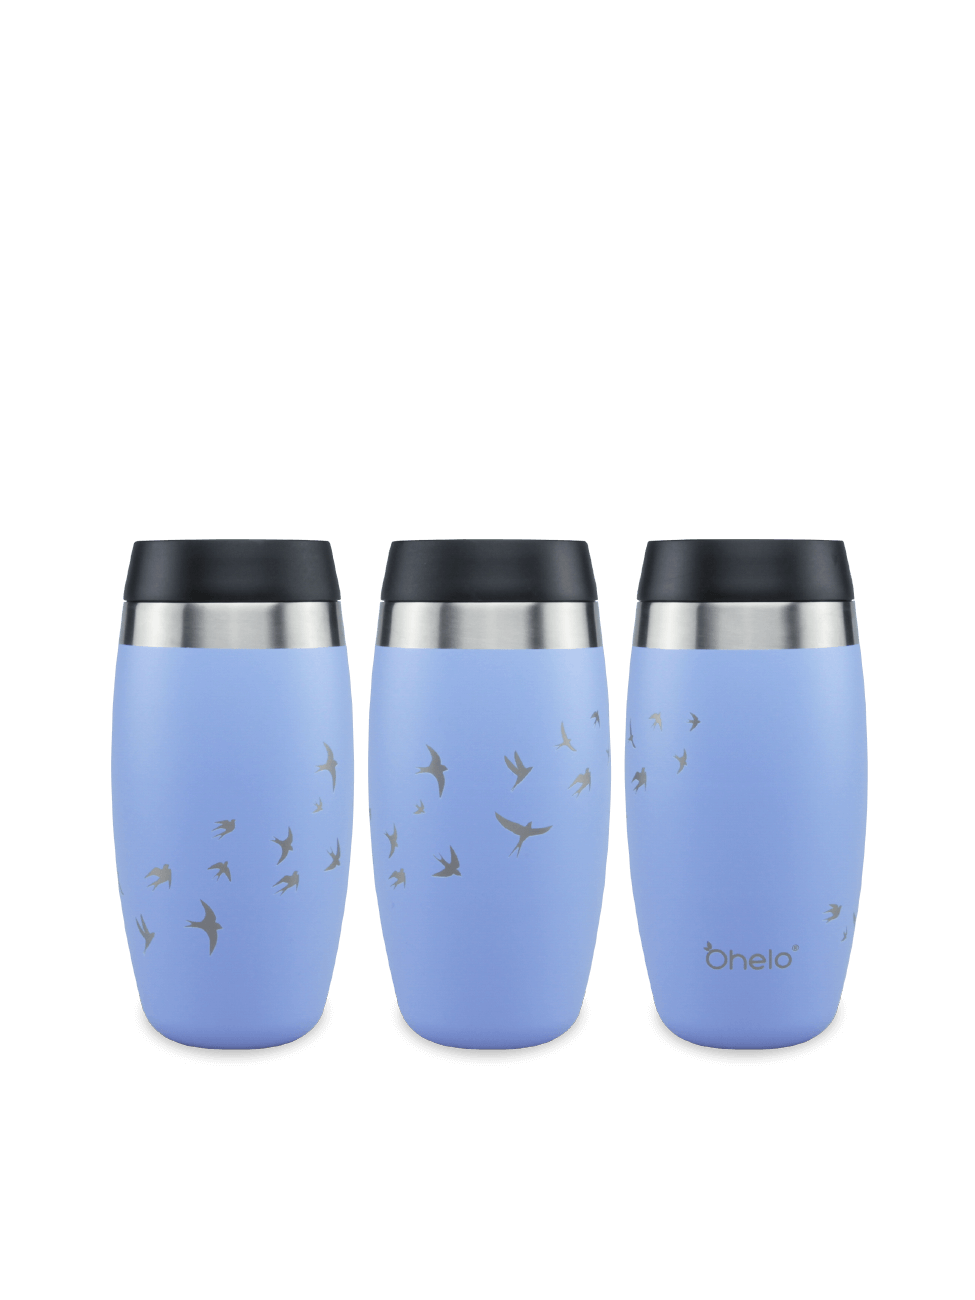 Ohelo blue reusable coffee cup in swallow bird design - image showing design from 3 sides